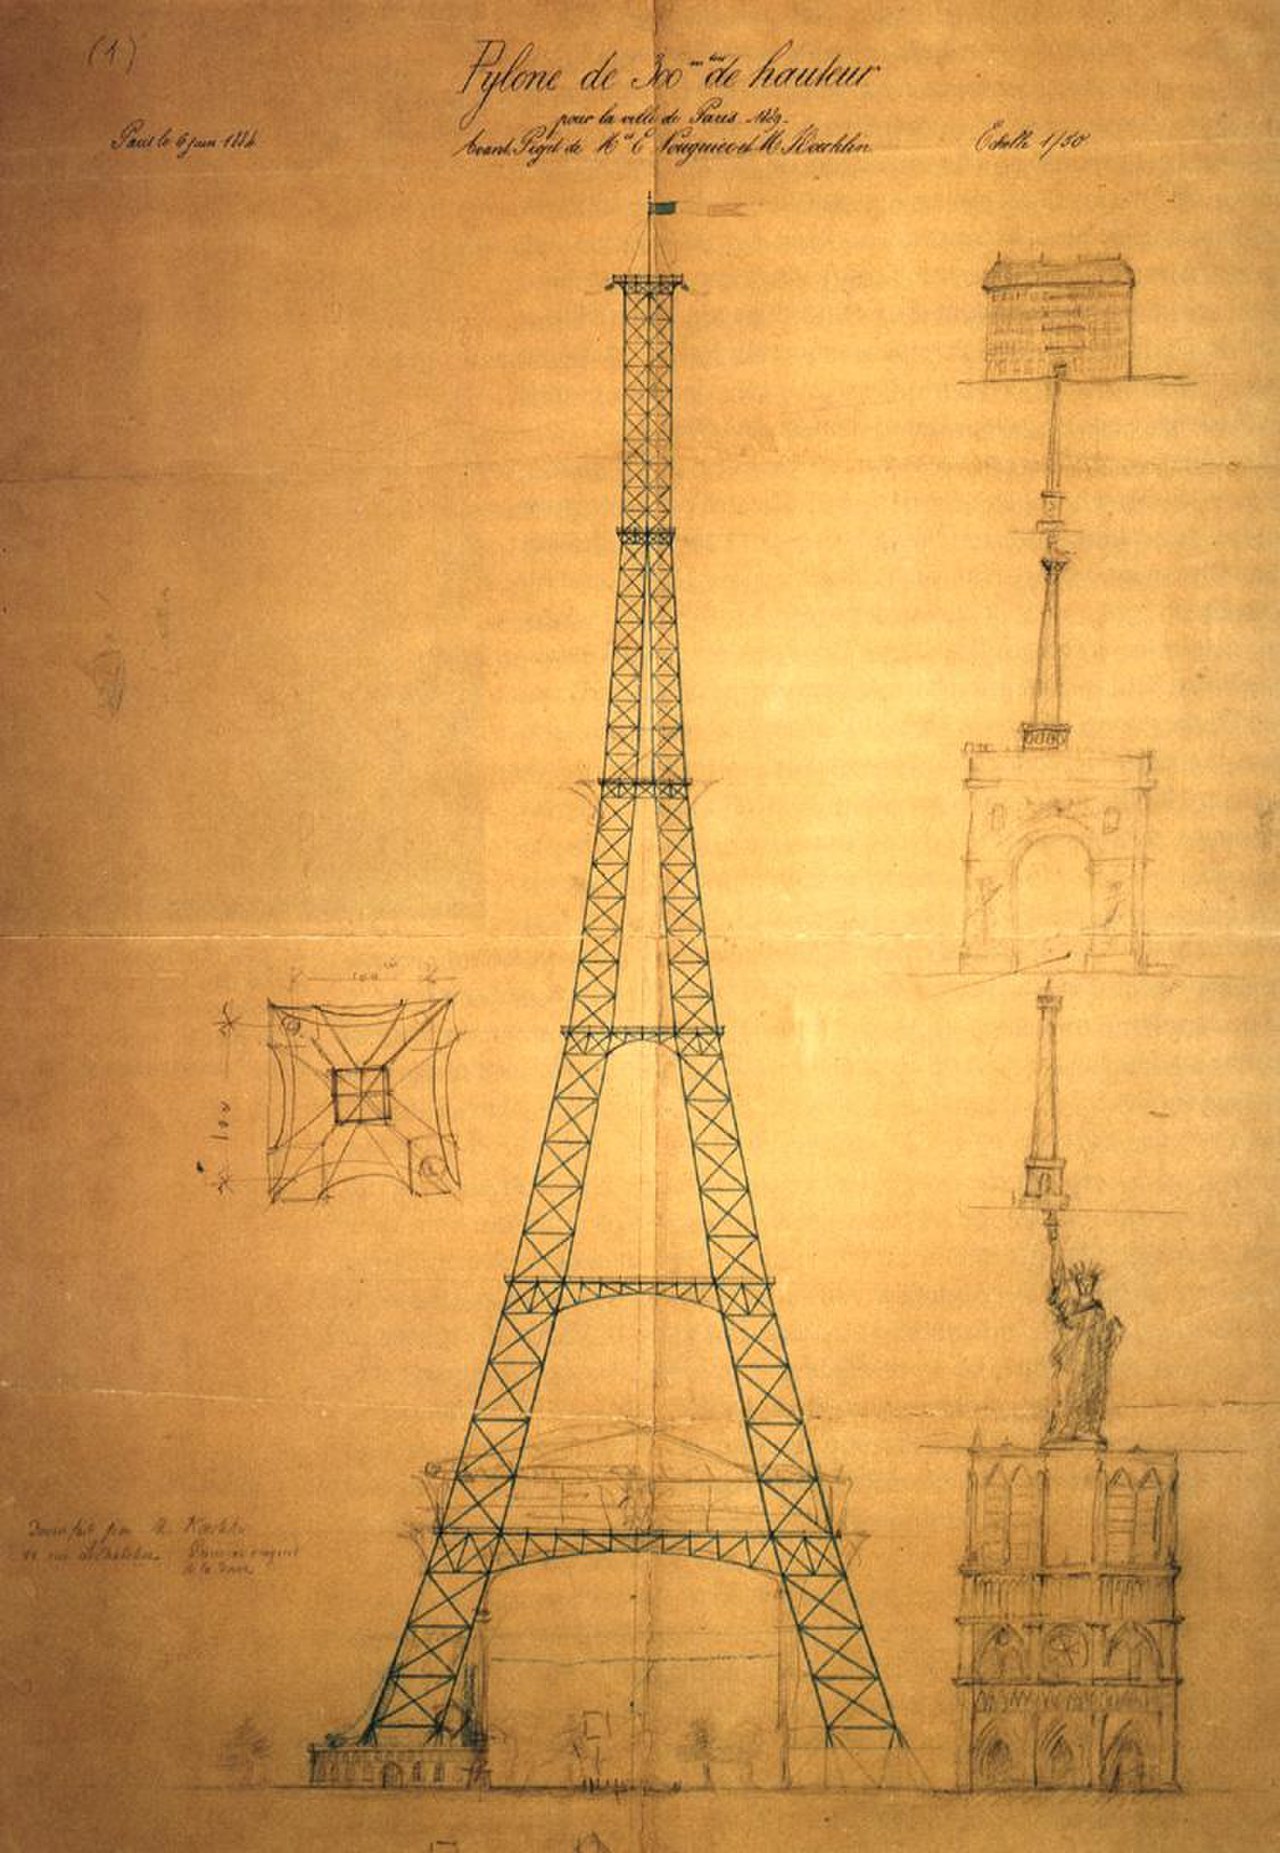 Koechlin's 1884 sketch of a 300m pylon, the basis for the Eiffel Tower © DR